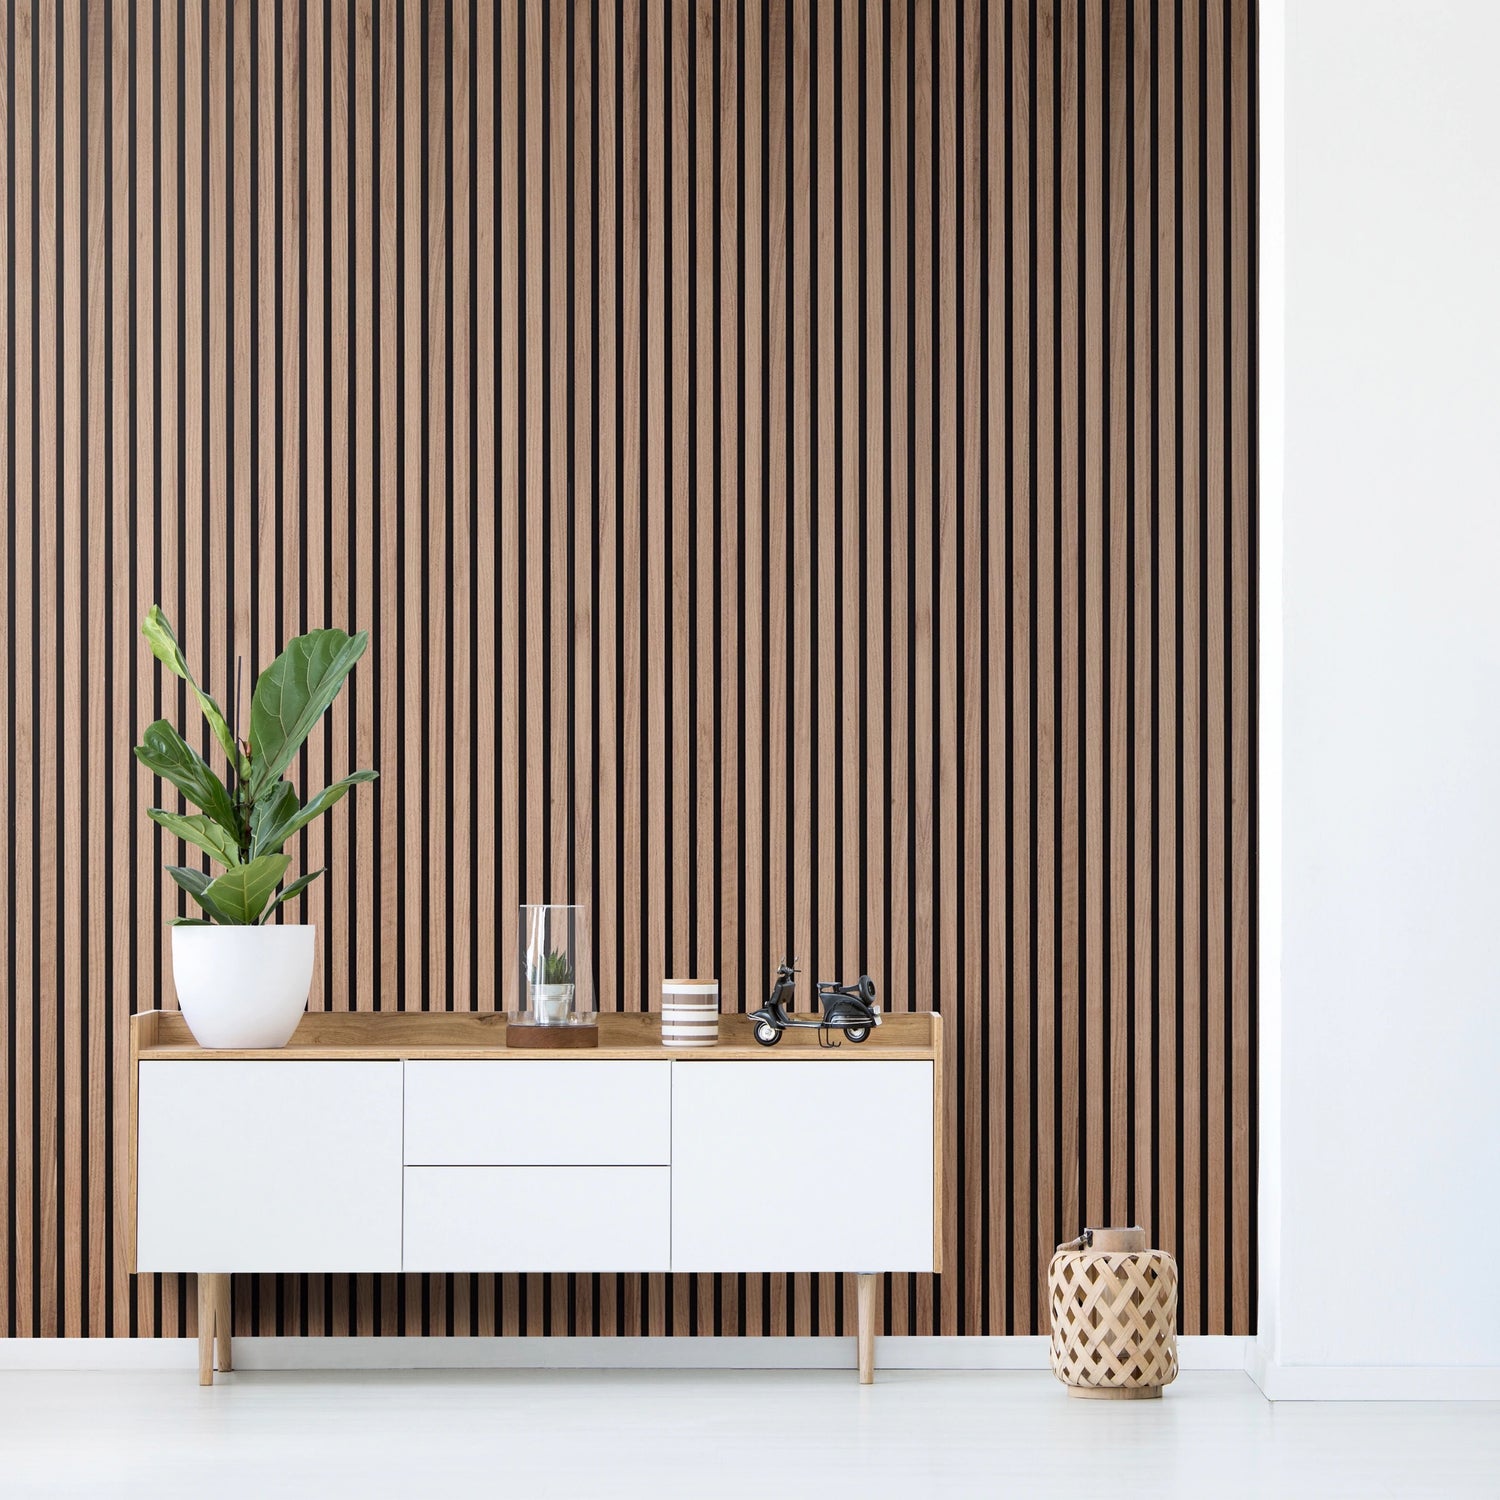 Acupanel® is the original out of the box acoustic slat wood wall panelling solution.